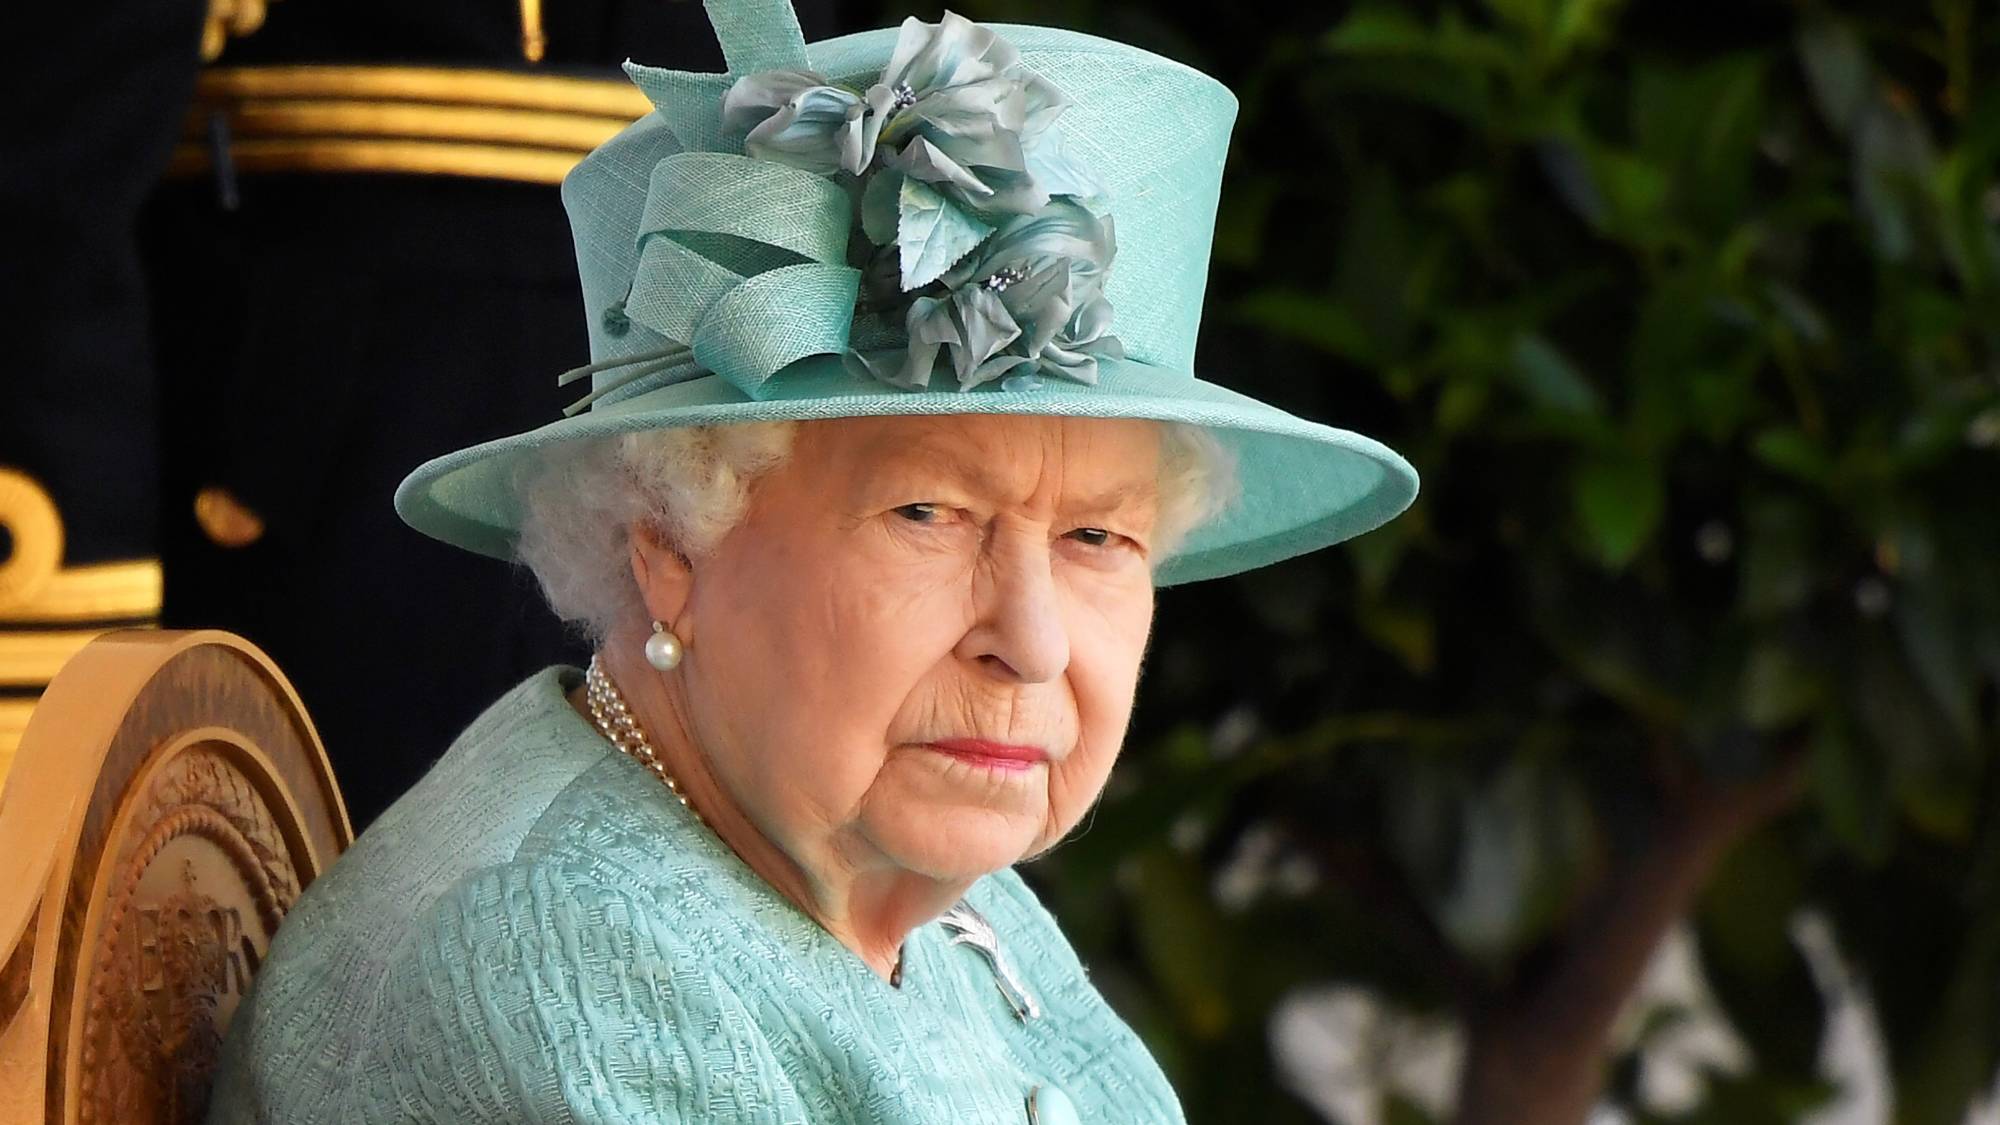 The Queen changed this aspect of her Trooping the Colour outfit for the first time in years